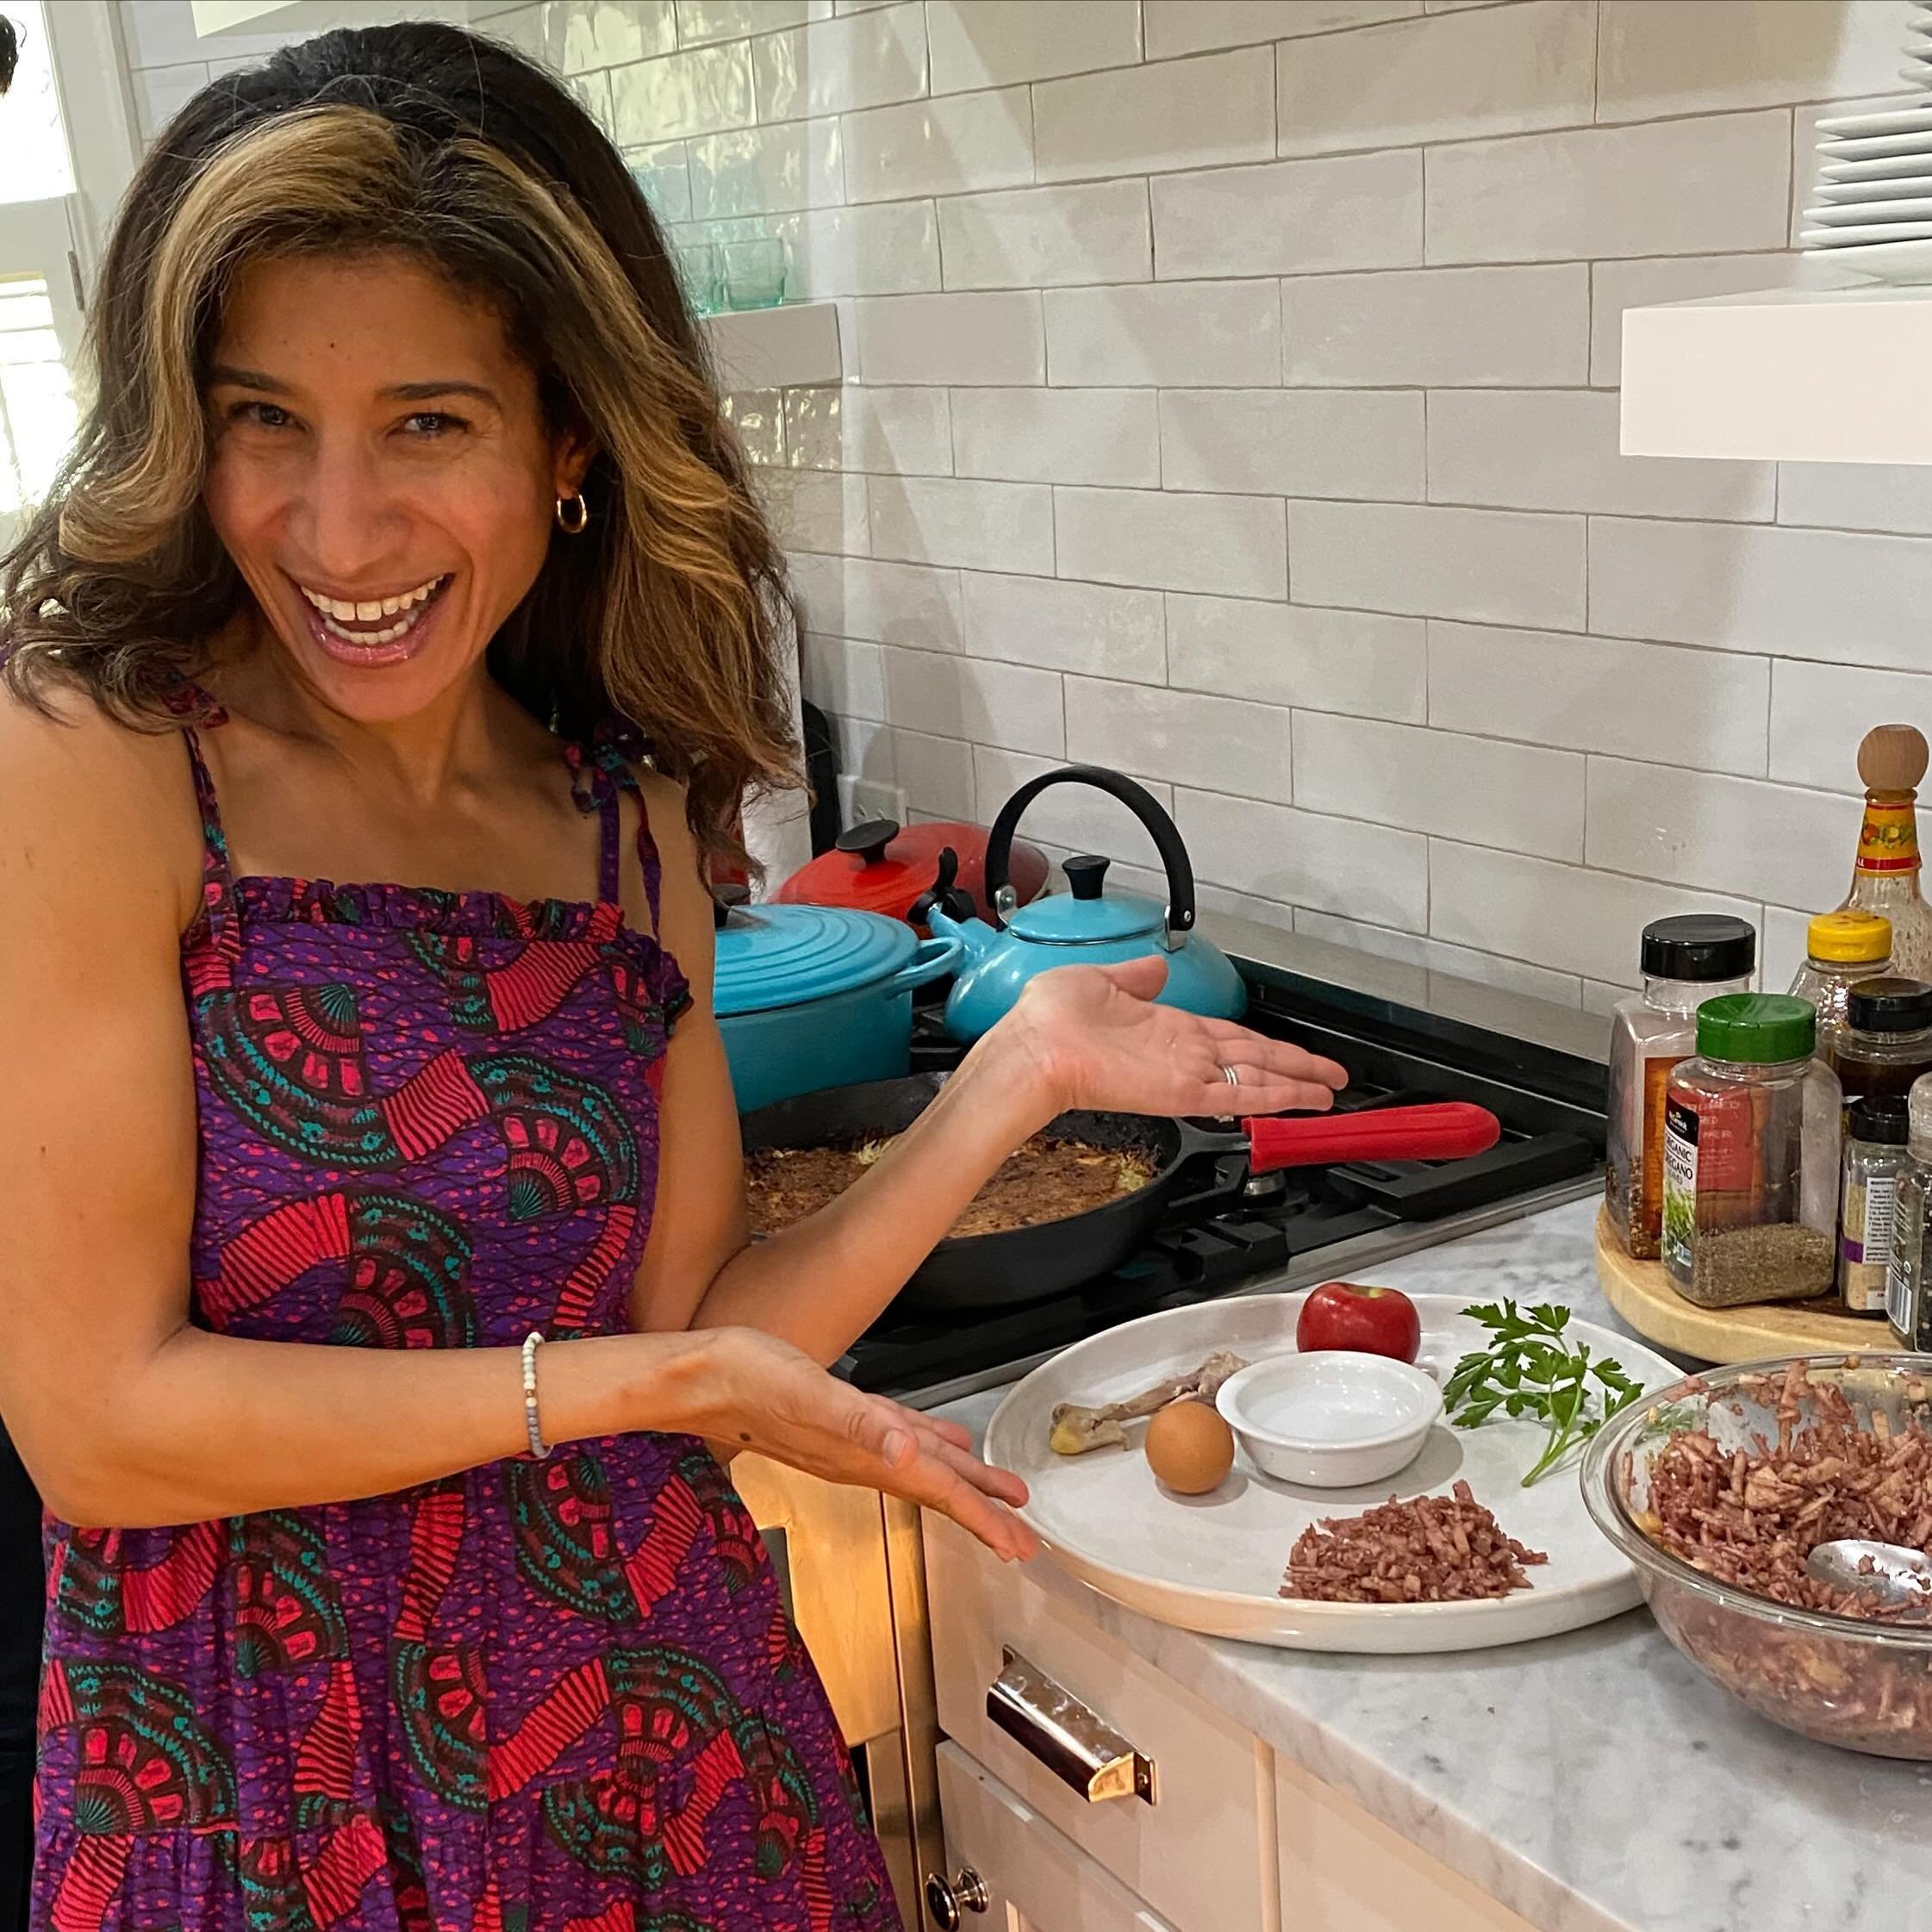 Today marks the first day of Passover, a celebration of hope, redemption, and freedom. Wishing a Happy Passover to all who celebrate! Chag Sameach! 

It&rsquo;s also the time of year for one of my favorite foods, charoset&mdash; a dish that during th